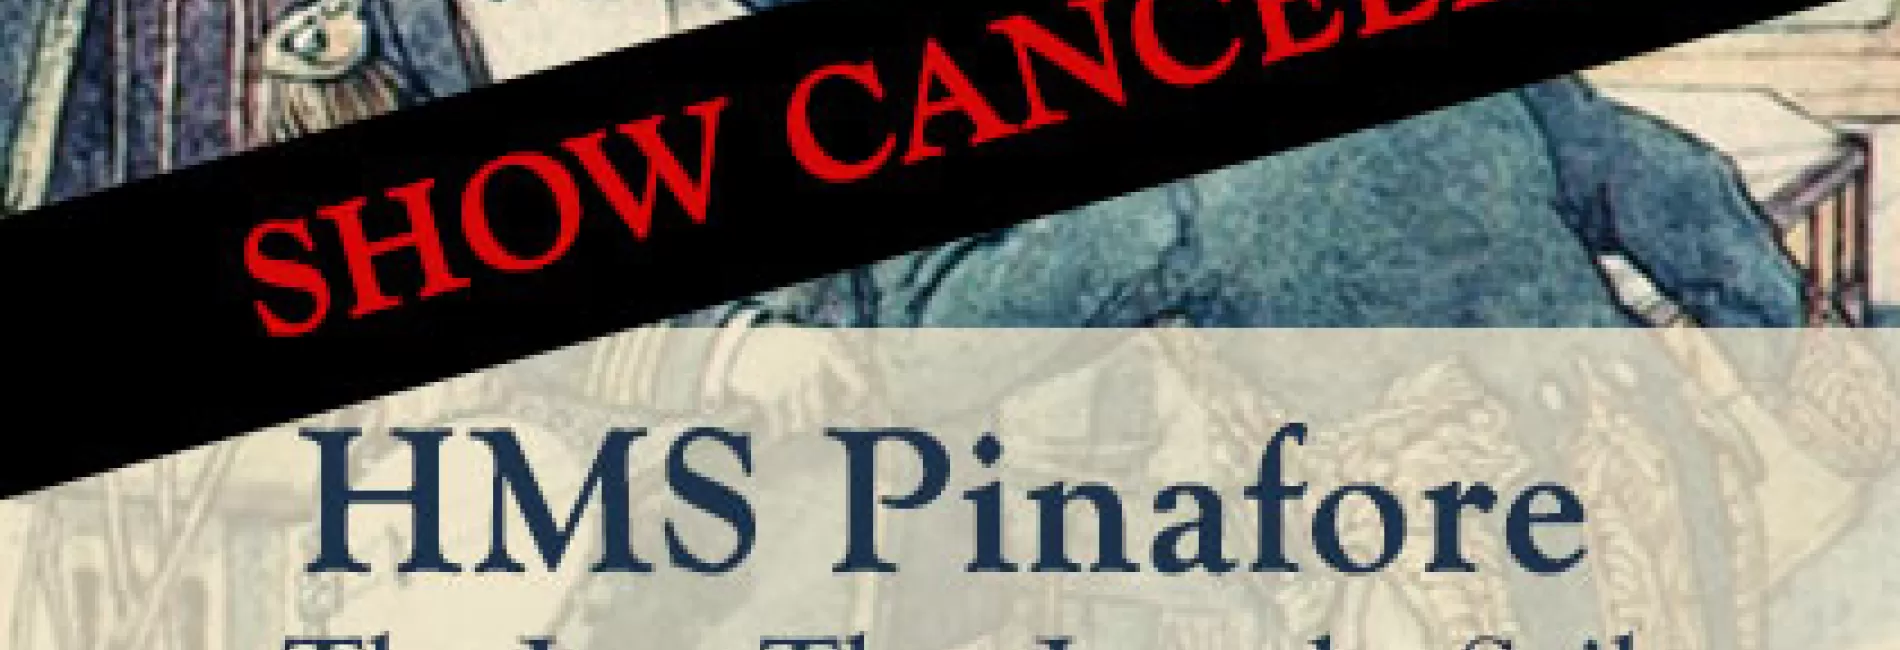 HMS Pinafore Streaming: CANCELED